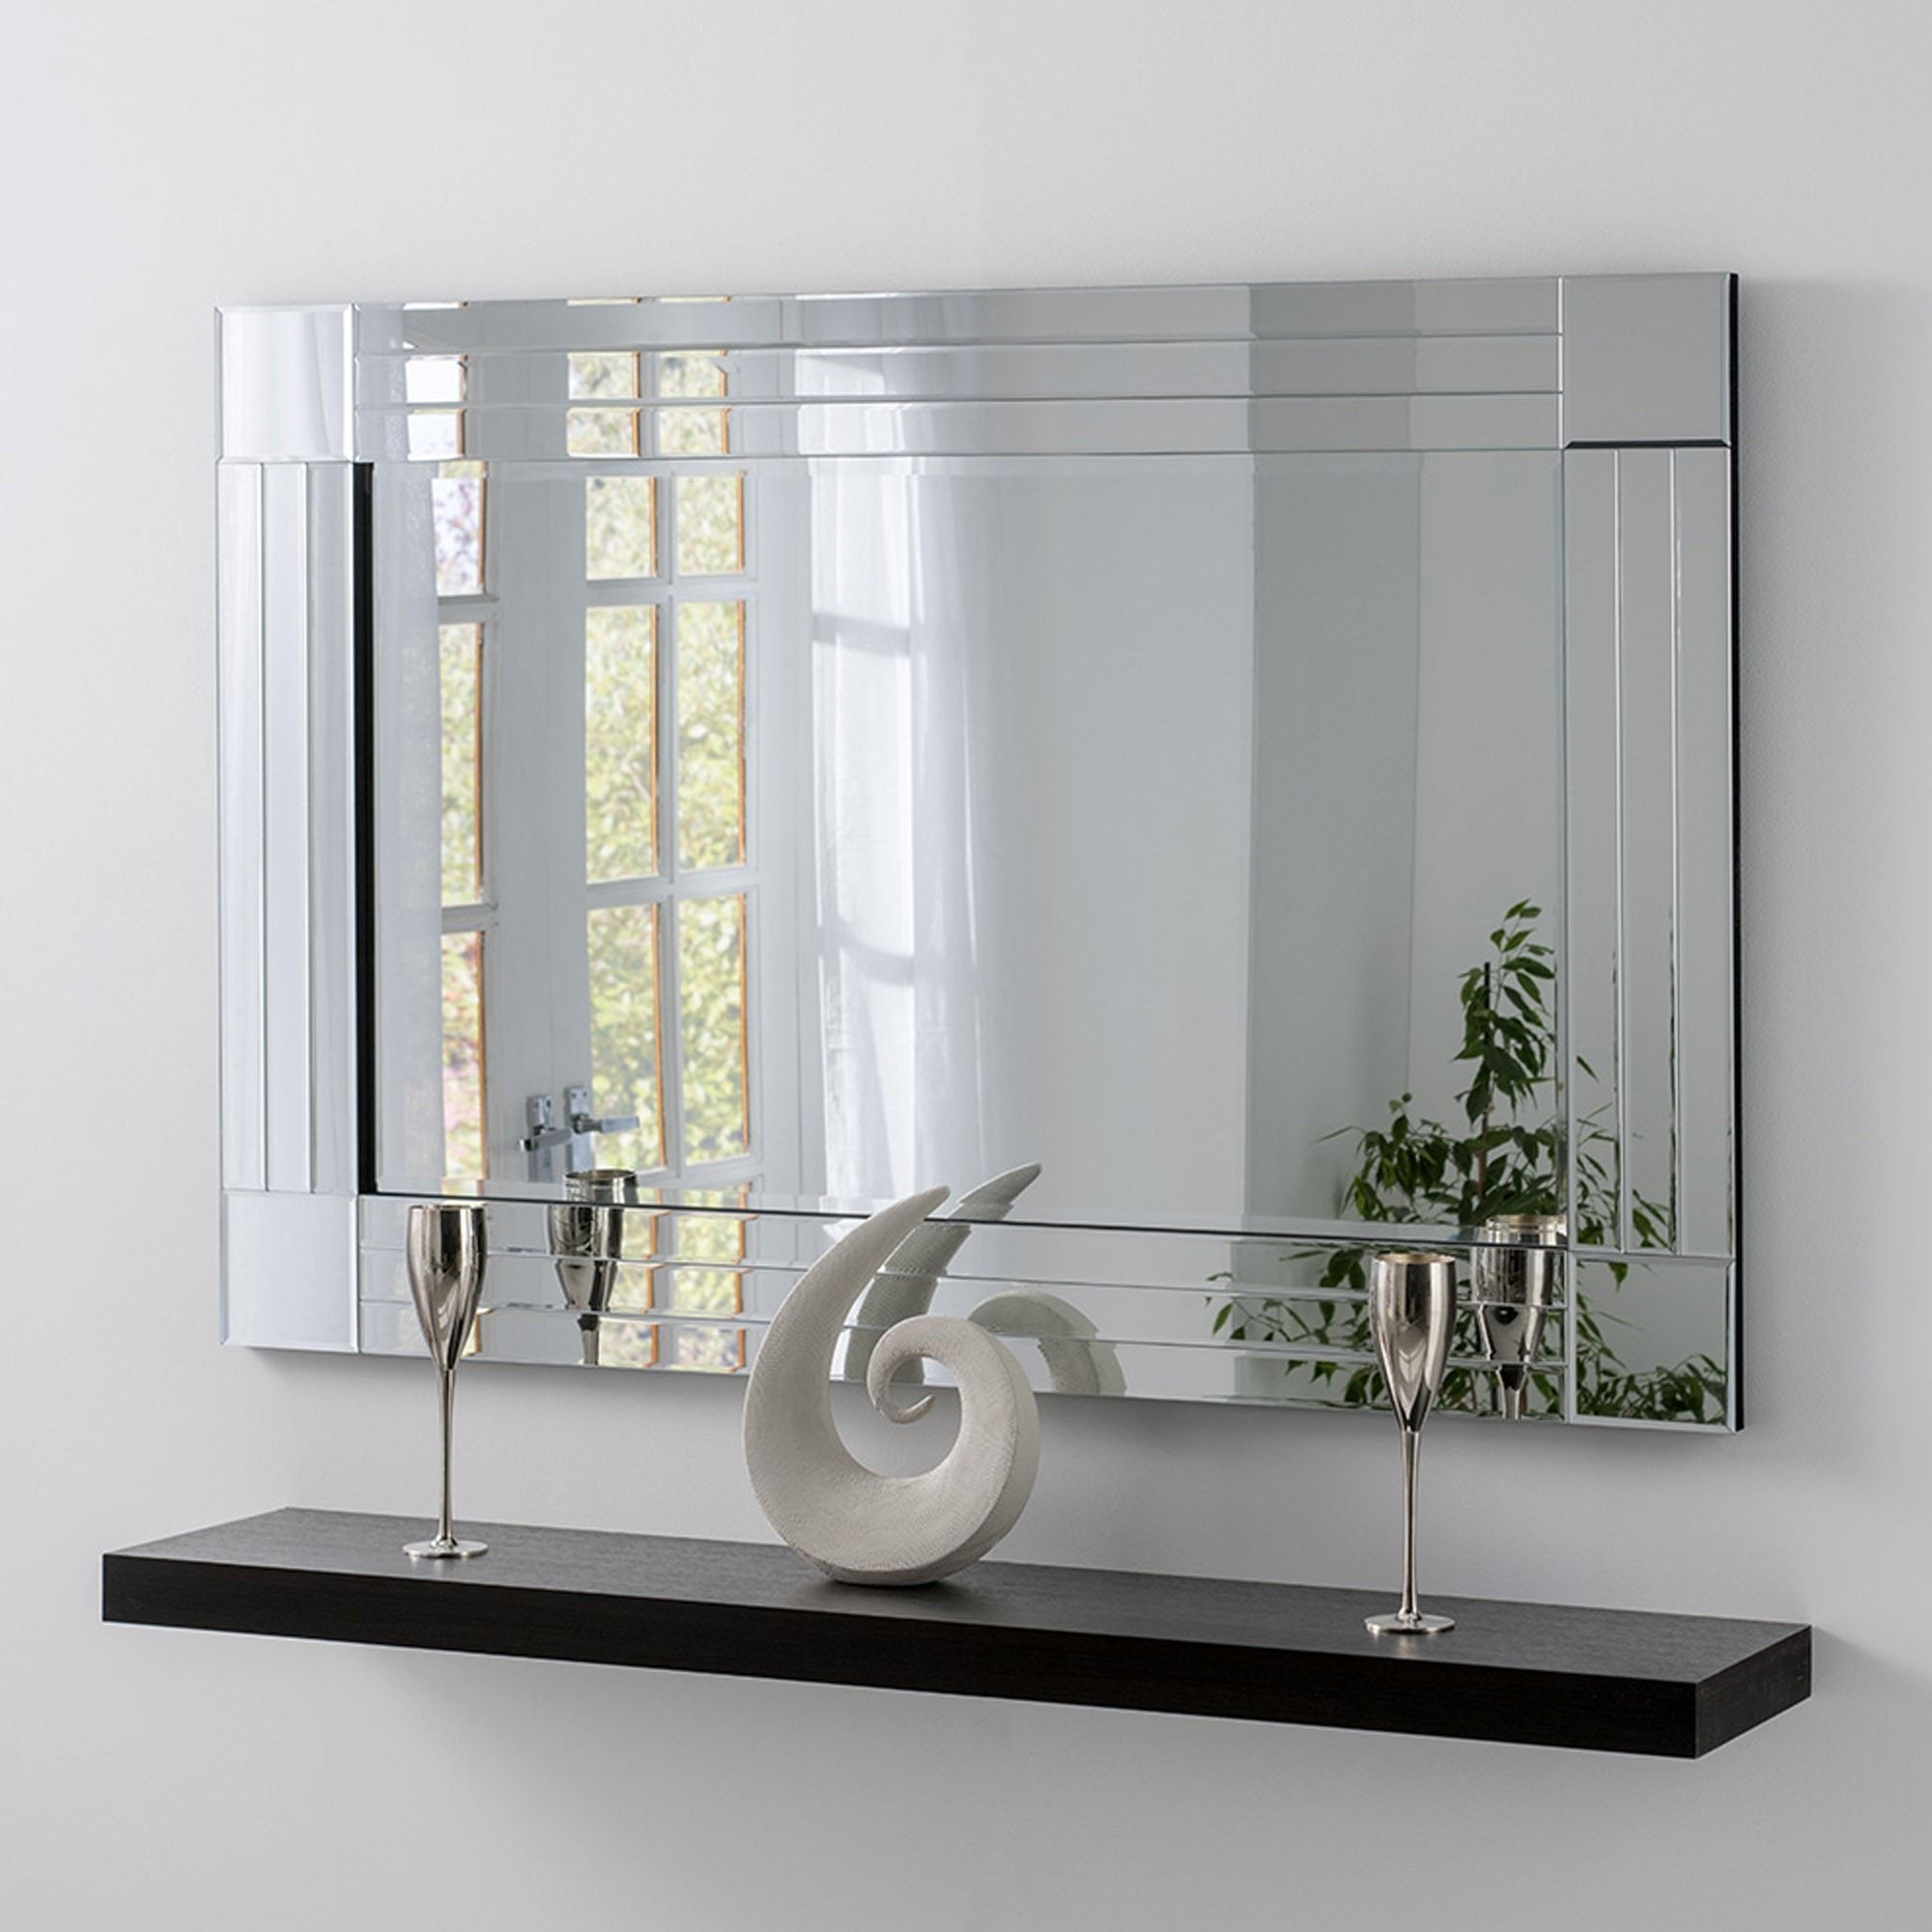 Contemporary Triple Bevelled Wall Mirror | Bevelled Wall Mirror With Regard To Wall Mirrors (View 13 of 15)